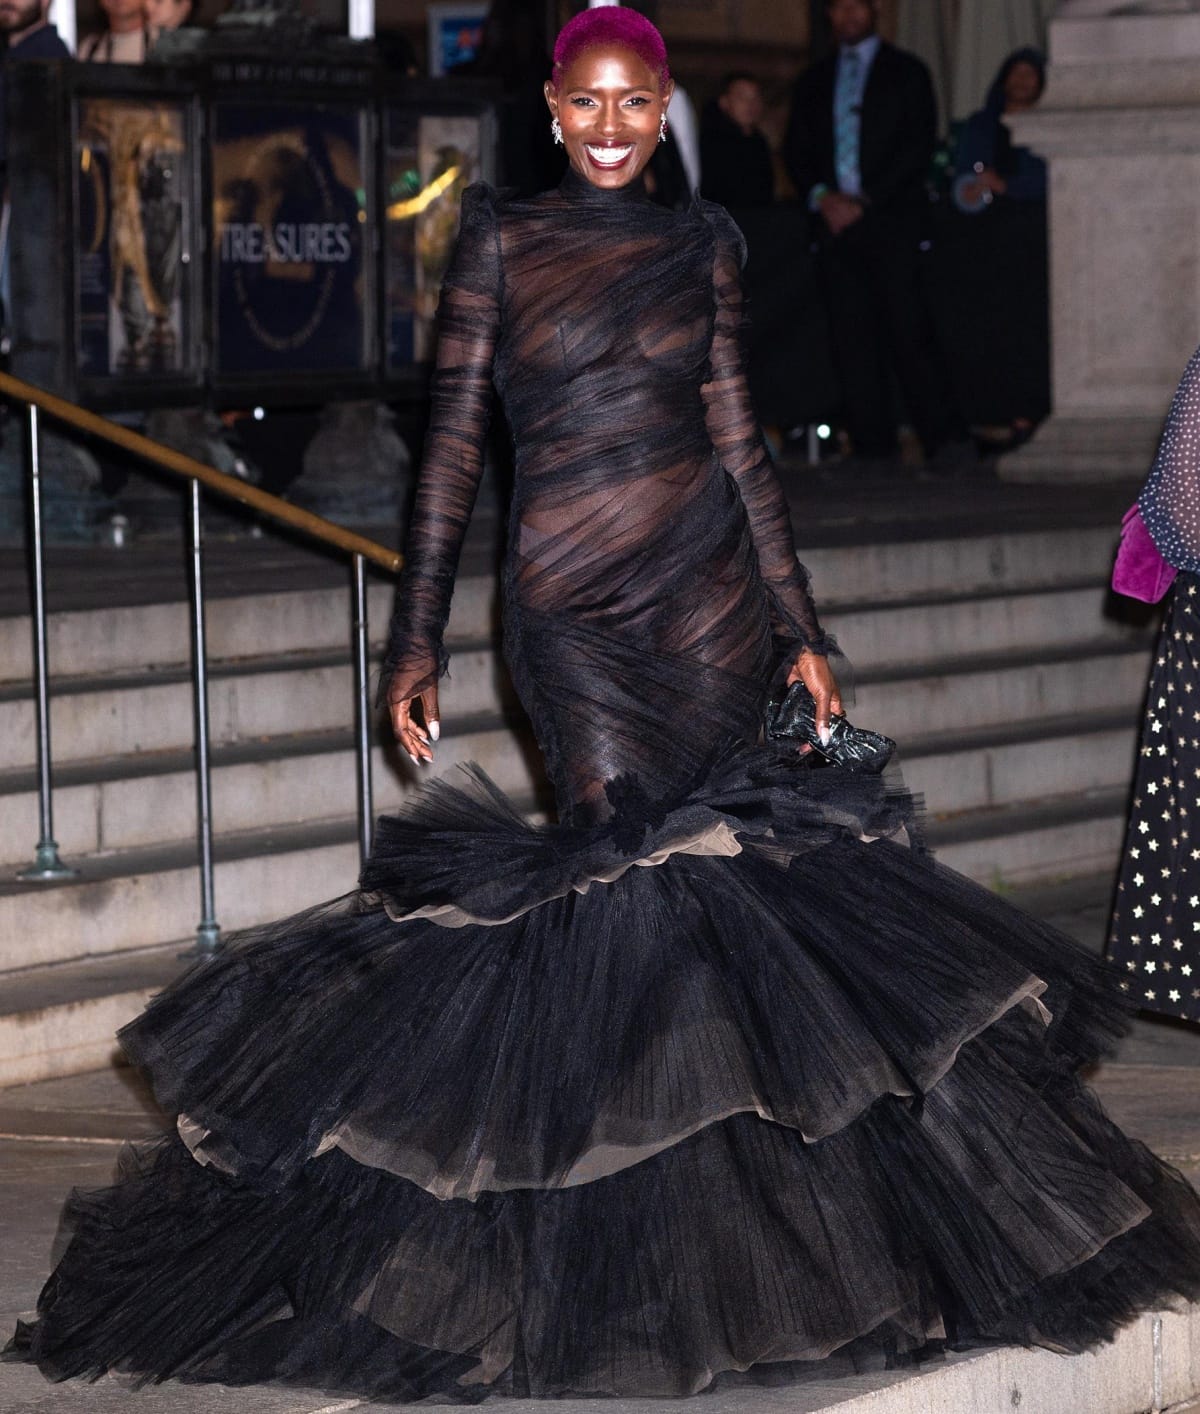 Jodie Turner-Smith wearing a Christian Siriano sheer black gown with a tiered mermaid skirt at the Clooney Foundation for Justice Inaugural Albie Awards